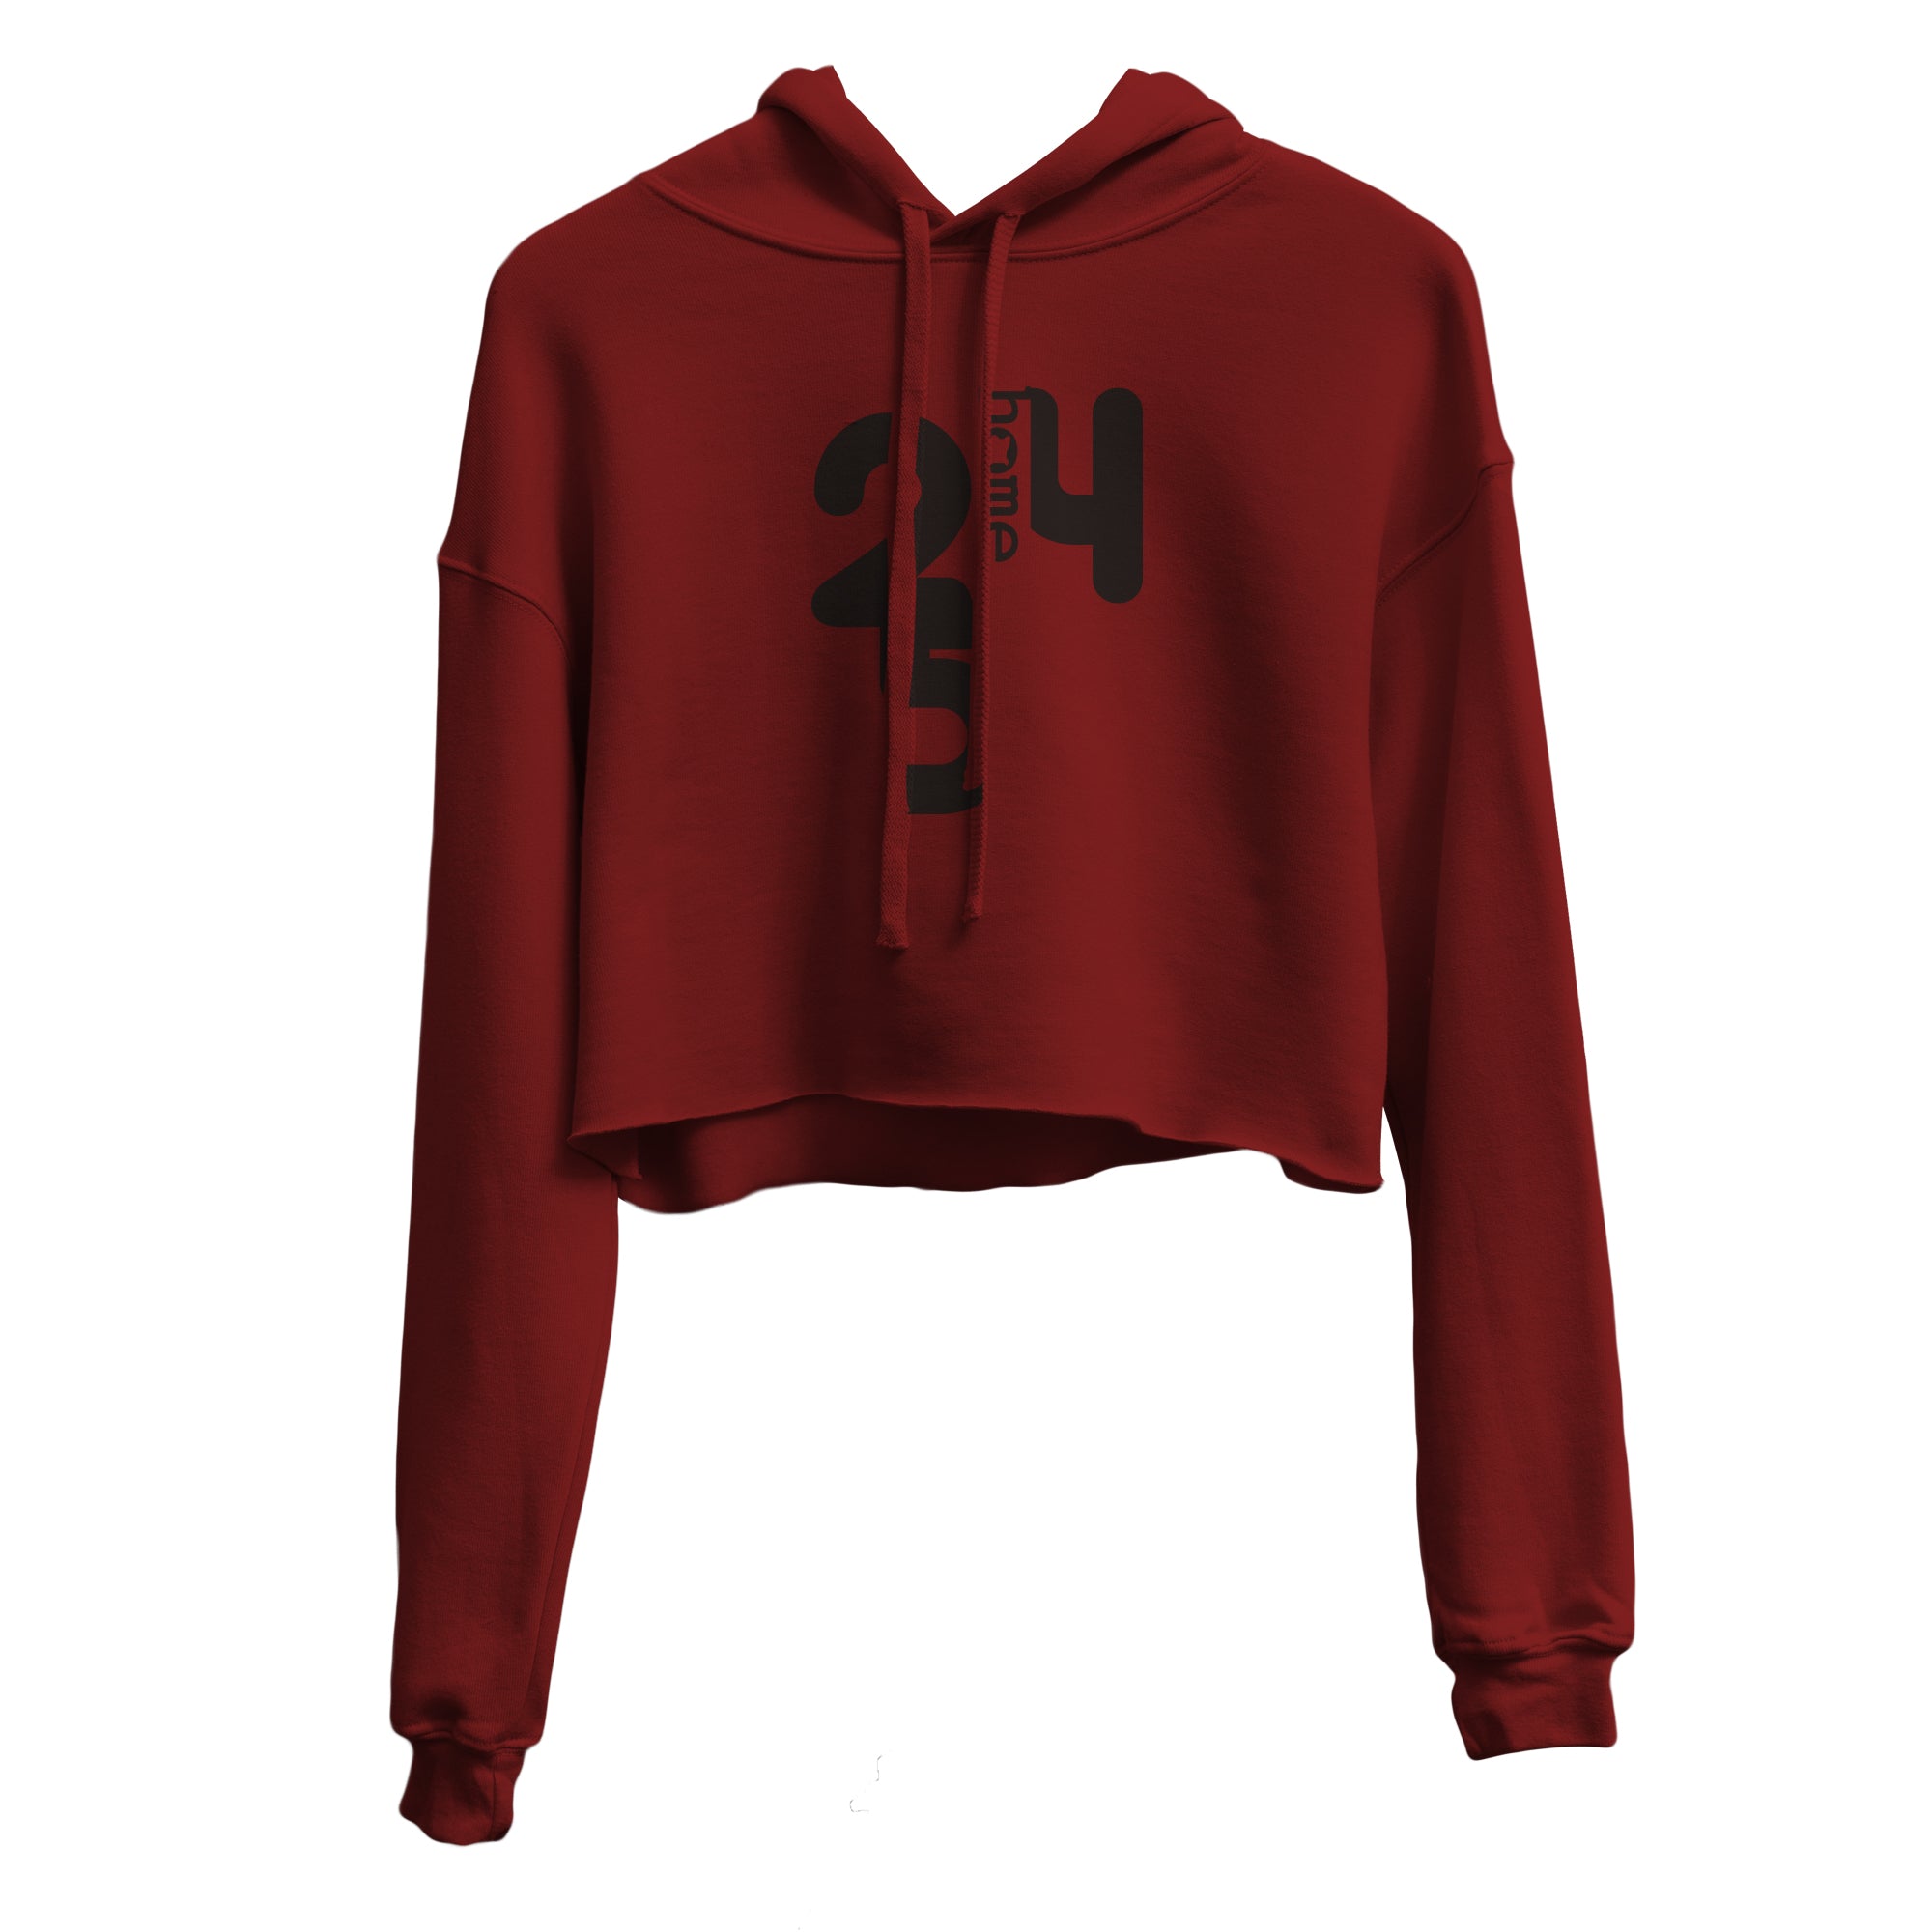 JBEEJURA DESINGZ | home_254 Burgundy Cropped Hoodie (heavy fabric) with a black the 254 logo